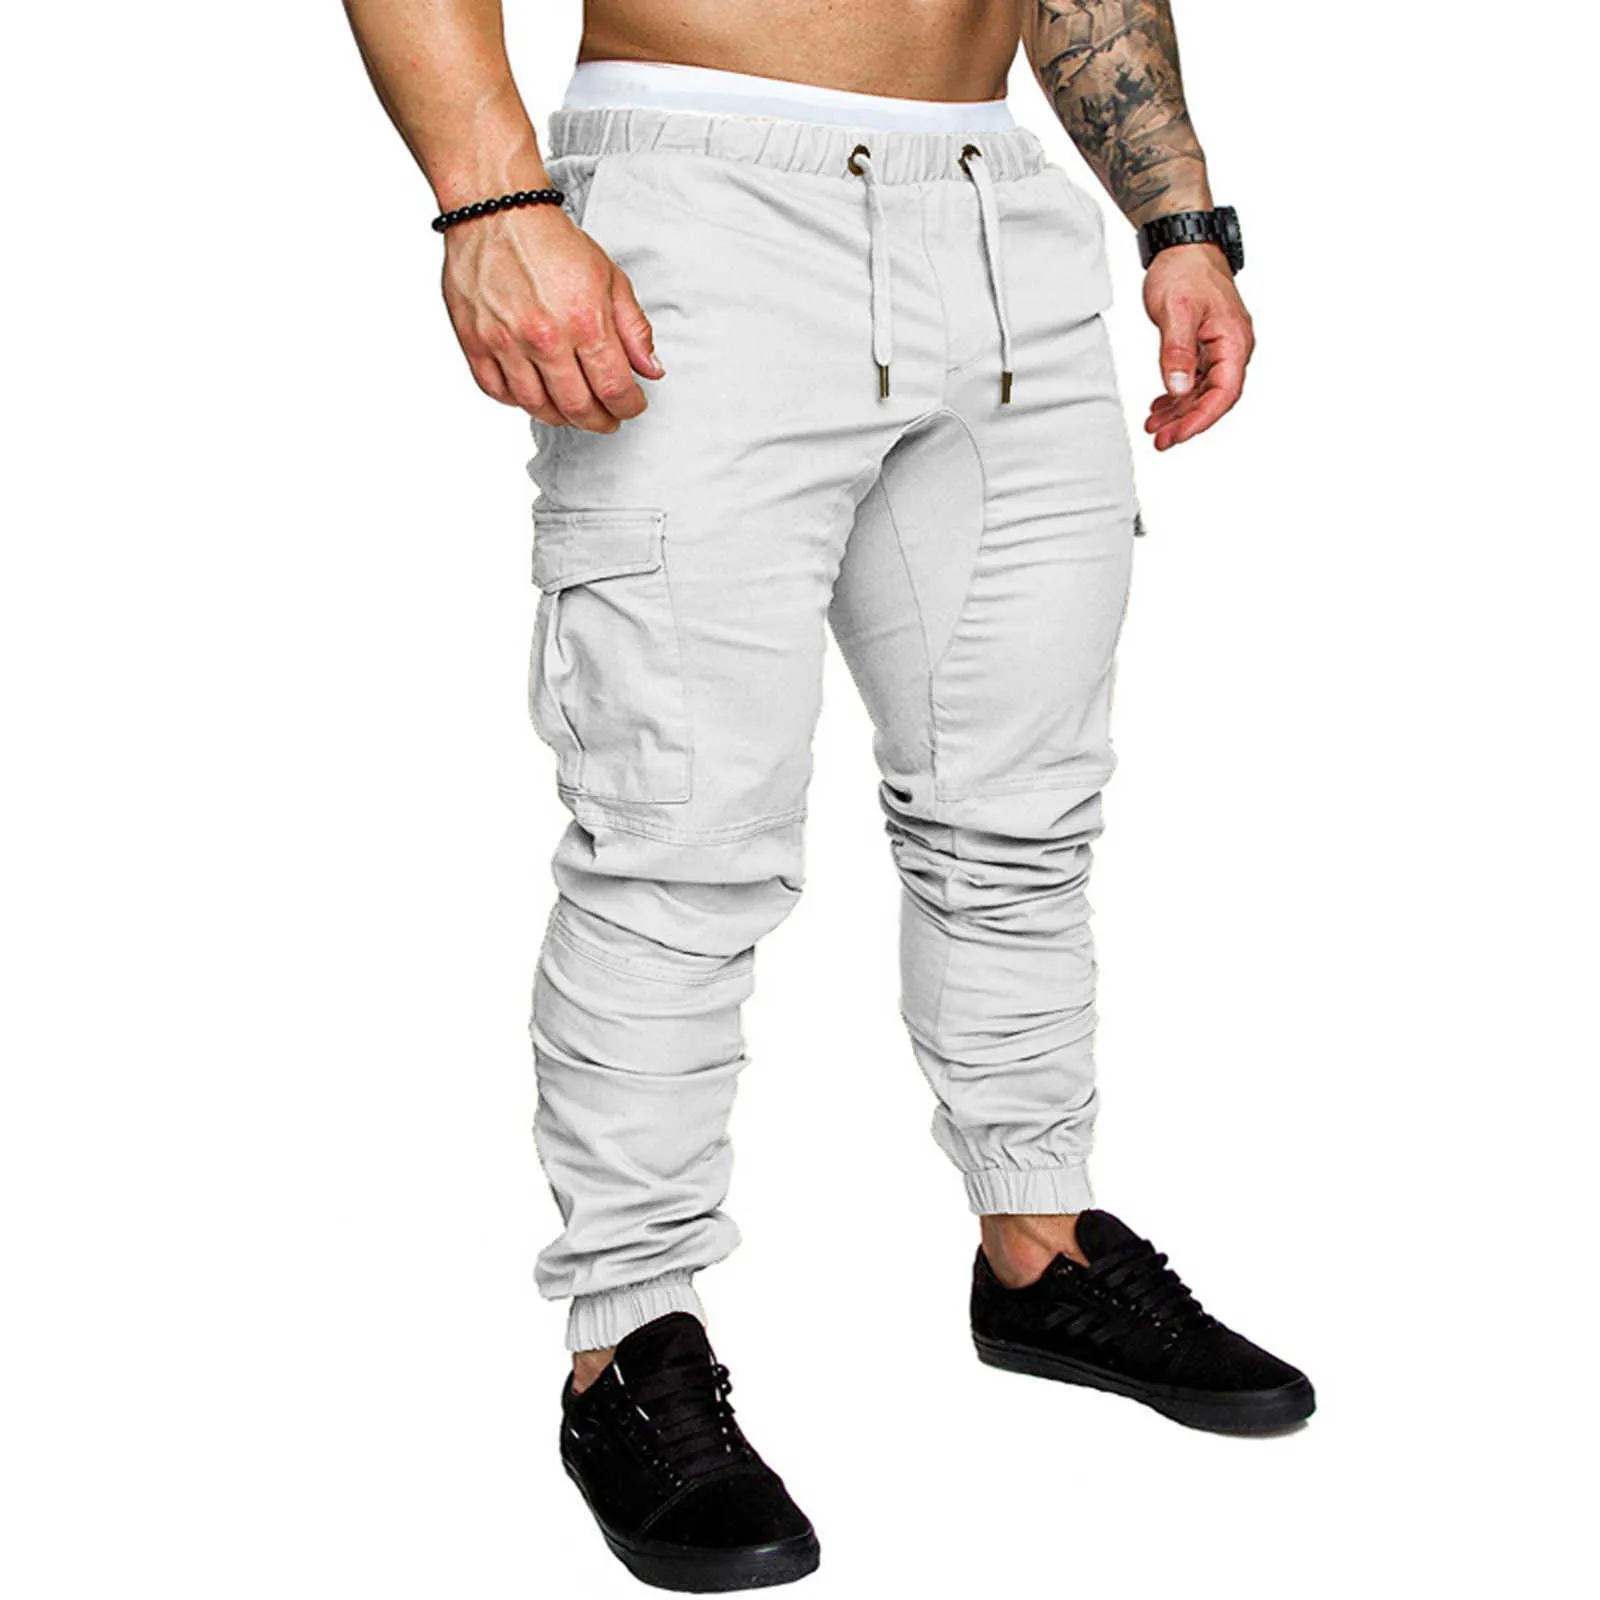 Casual Men Ankle Slim Fit Pants Midwaist Stretch Hip Hop Jogger Length Fashion Breathing Trousers#G30 210715